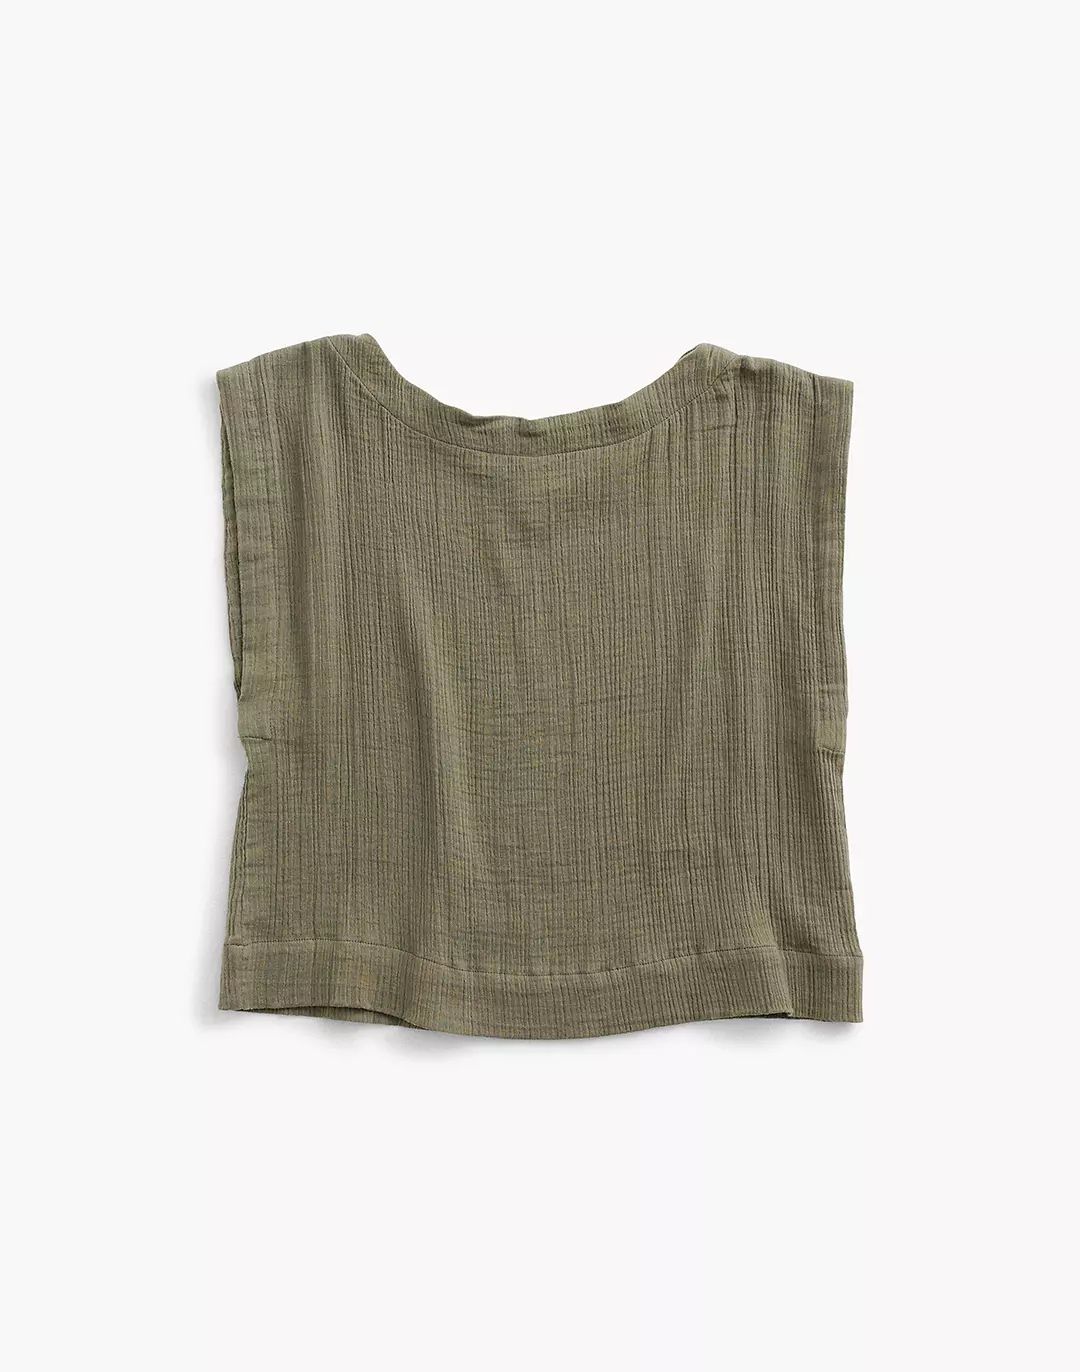 LAUDE the Label Everyday Top in Sagebrush | Madewell